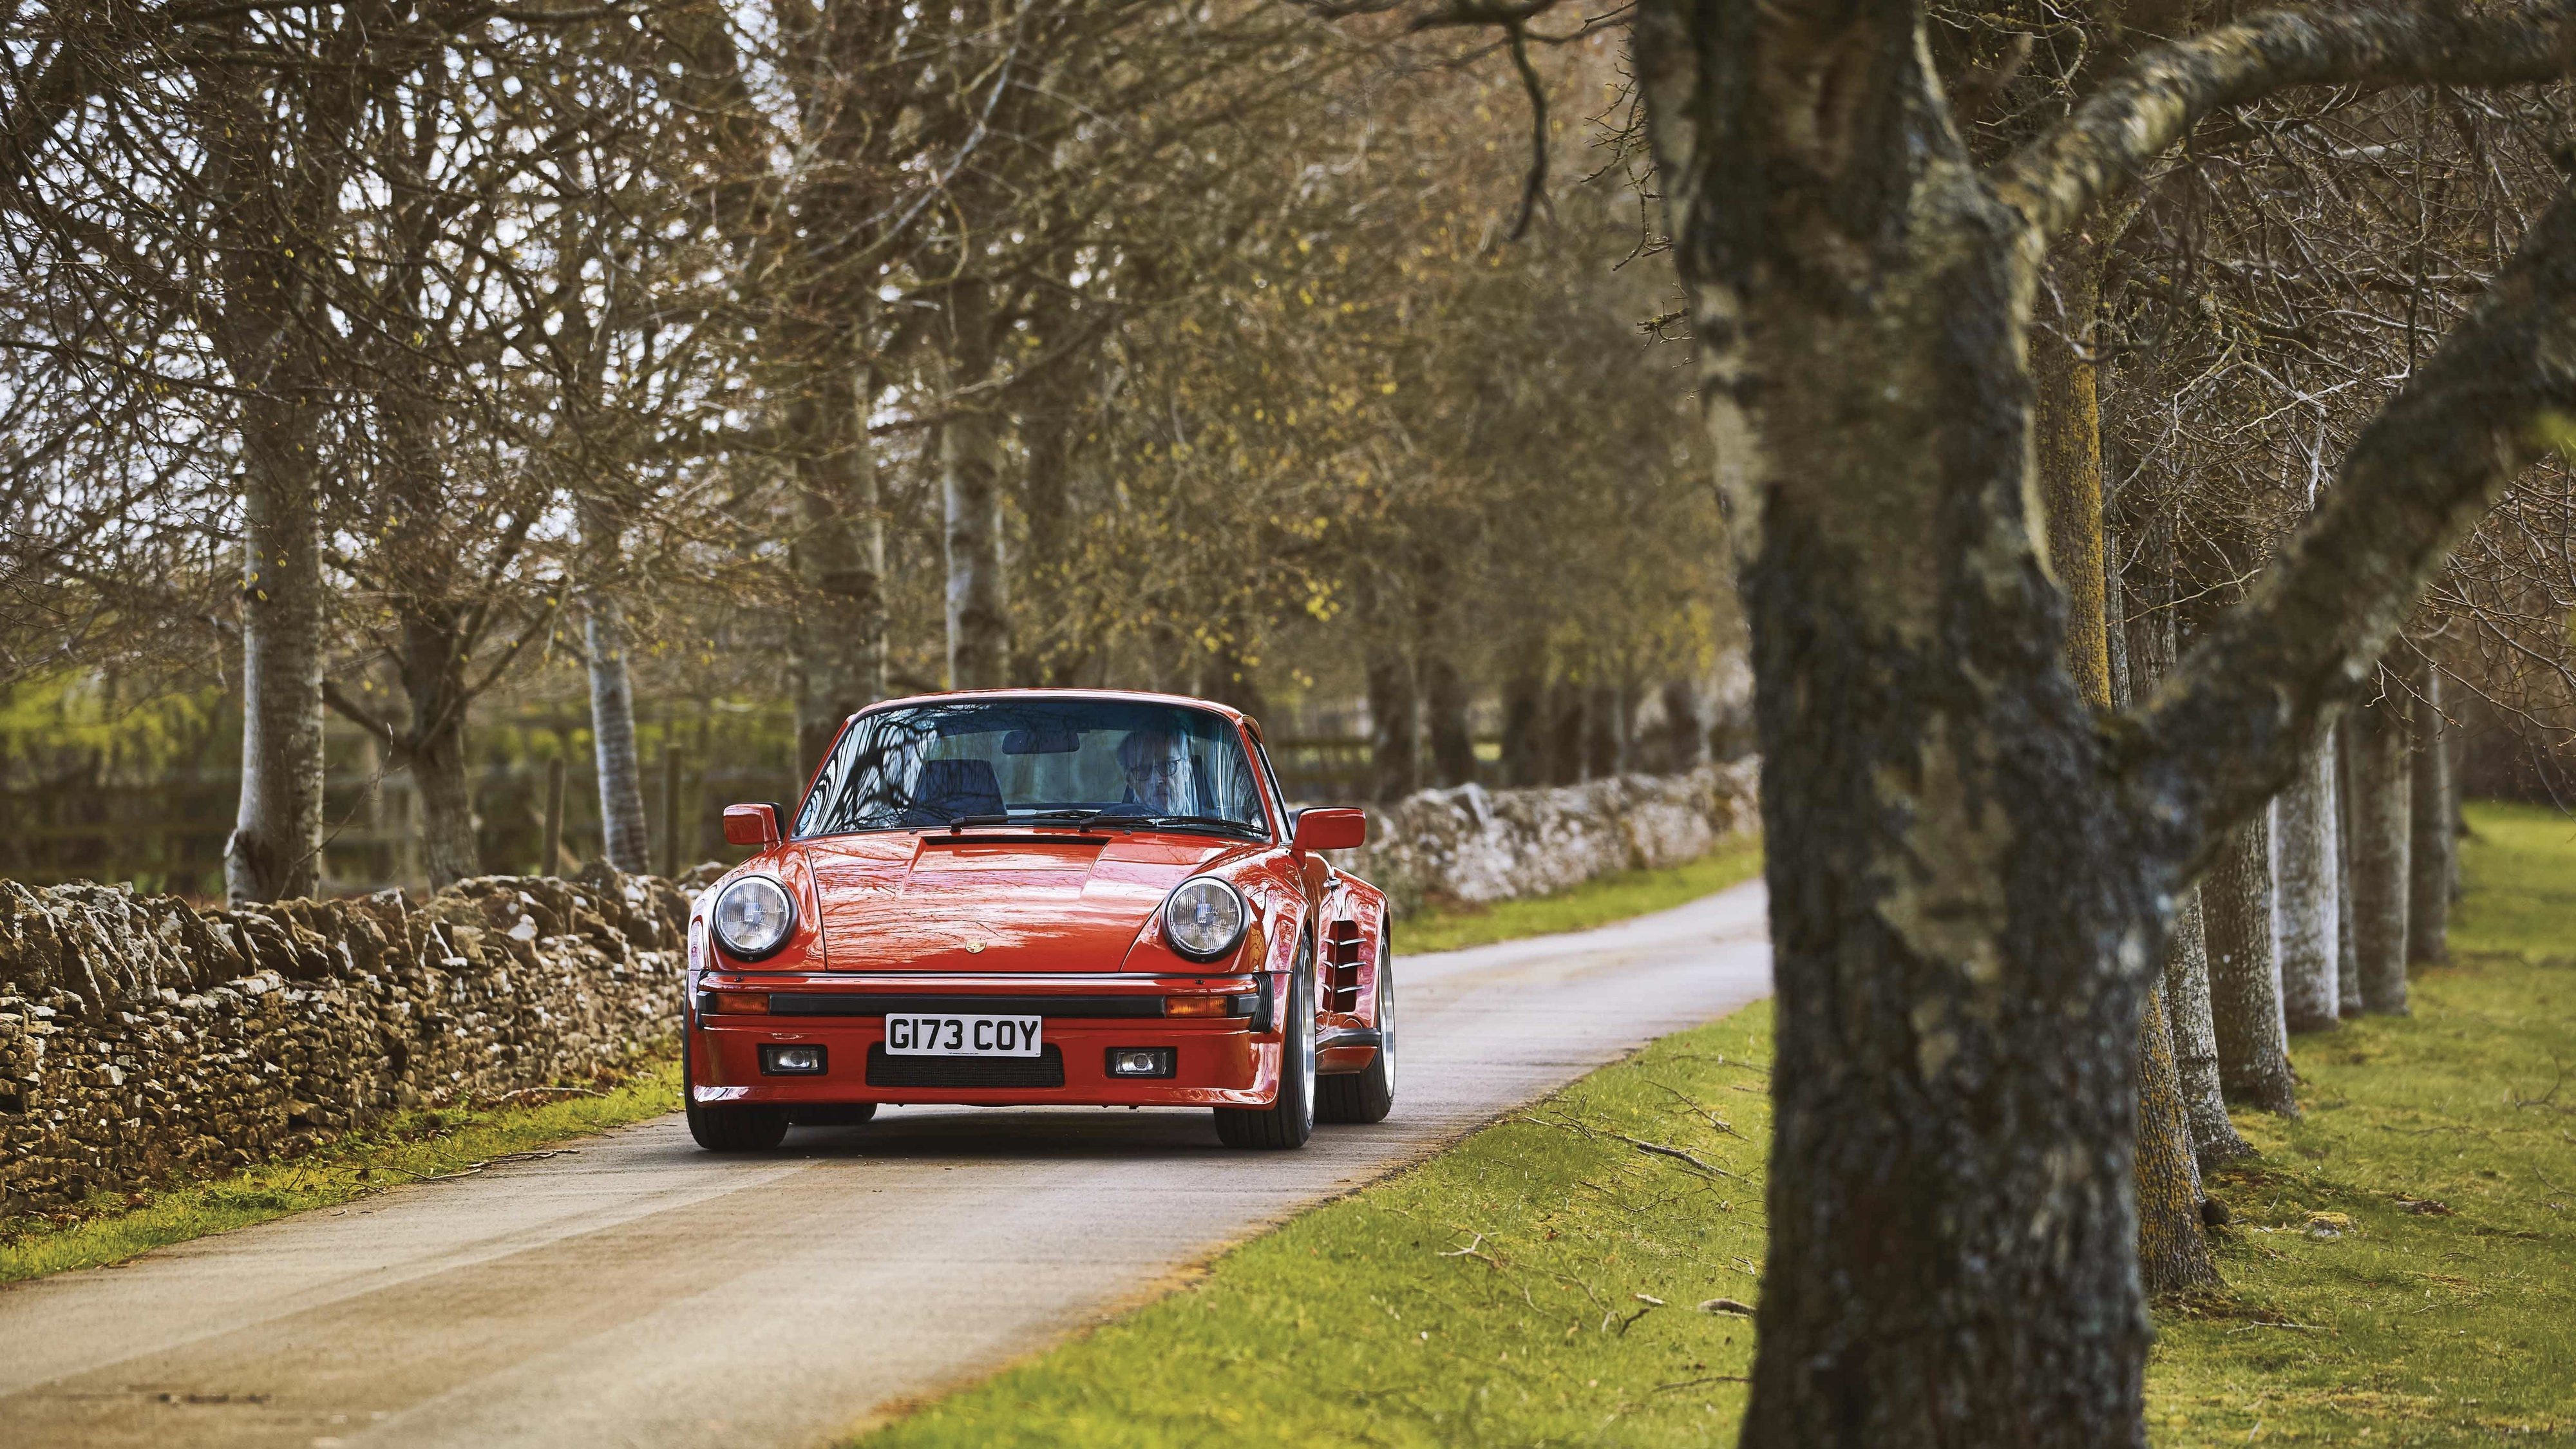 Porsche 930 Turbo S in Guards Red on tree-lined road